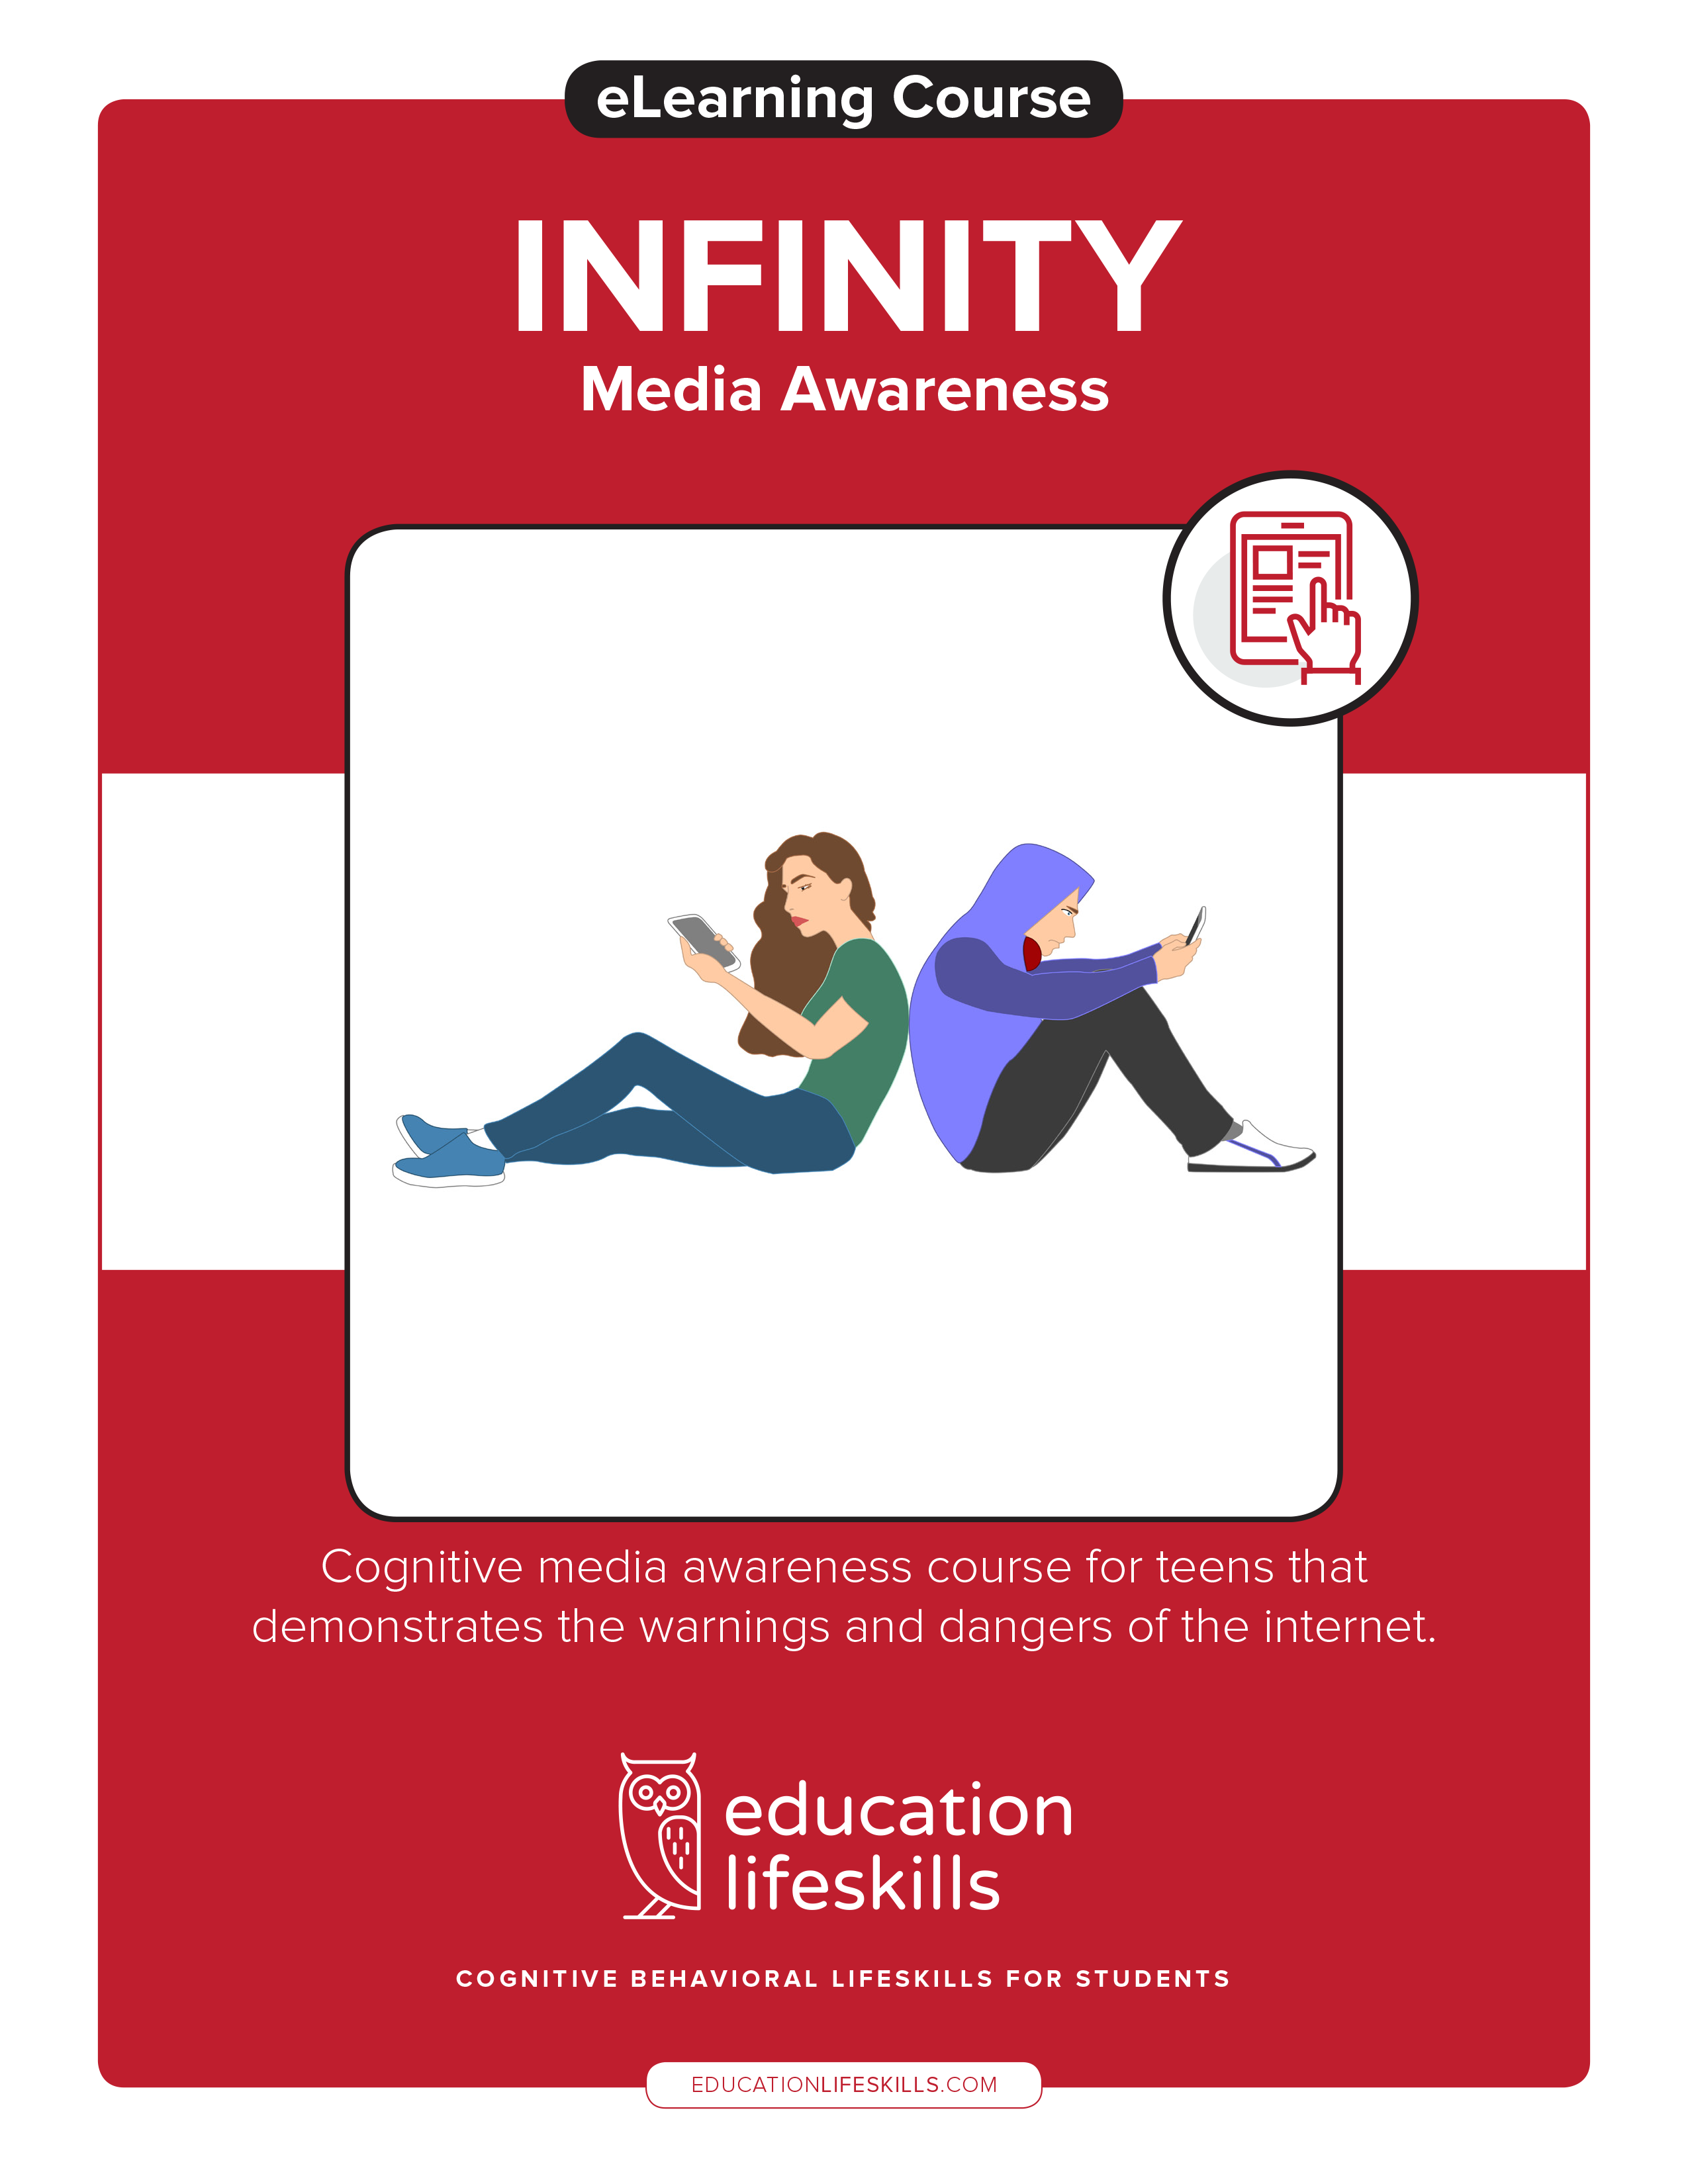 Infinity - Media Awareness Course: Helping Students Avoid Technology Addictions